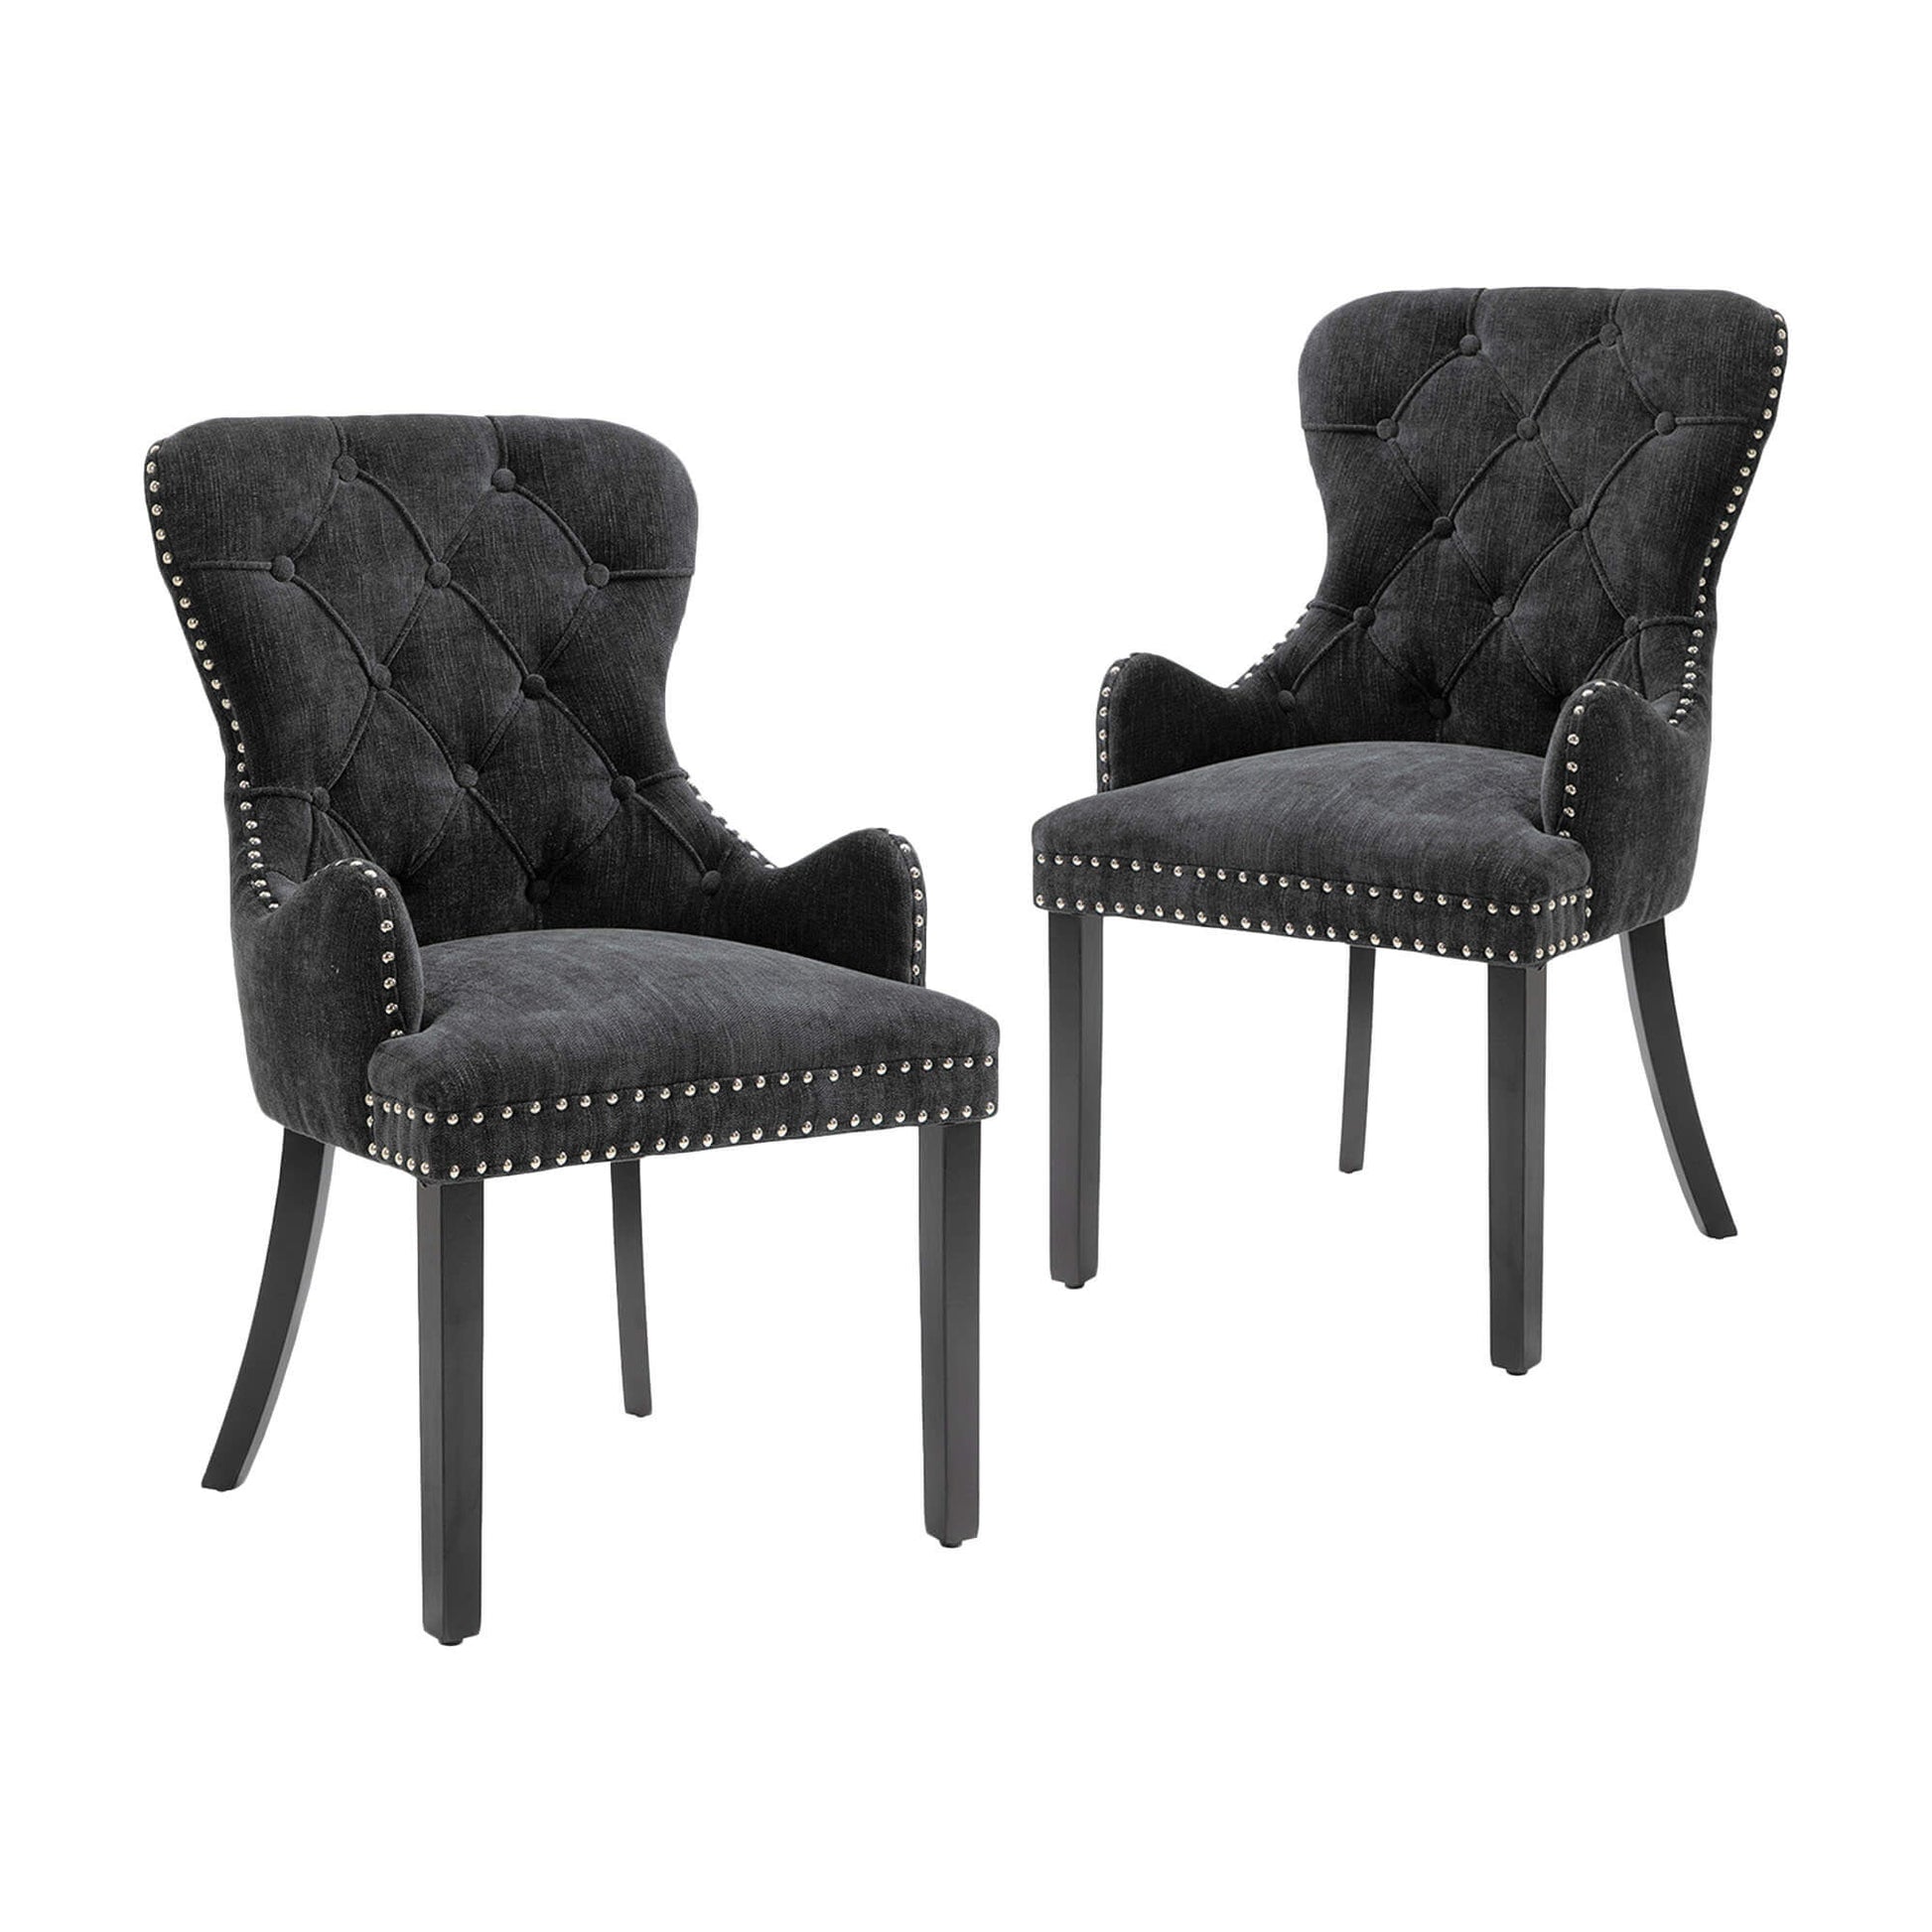 Genoa Version 1 | Fabric French Provincial Wooden Dining Chairs With Arms | Set Of 2 | Black